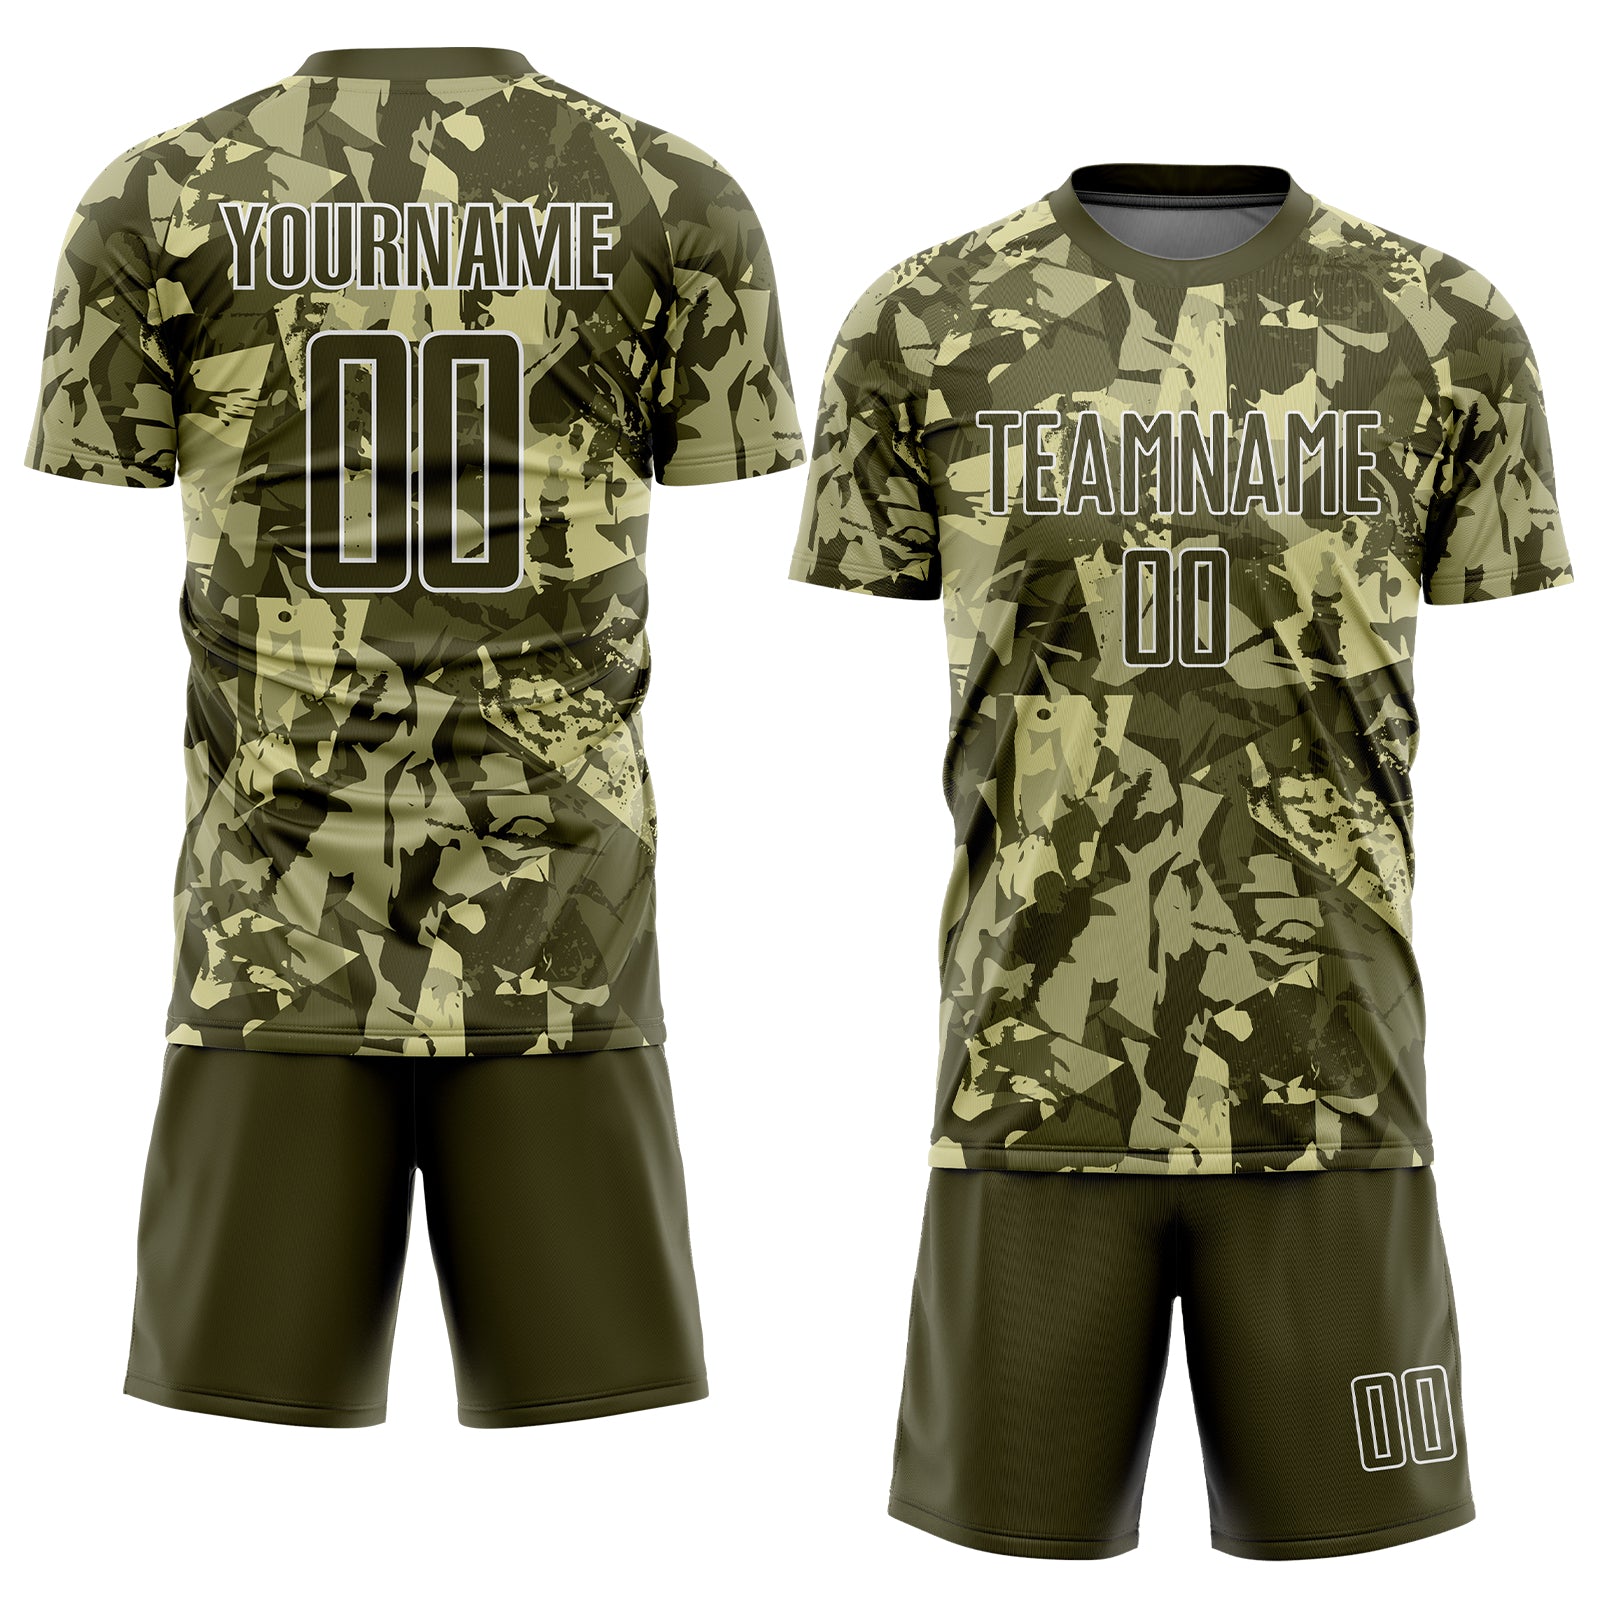  Camouflage Custom Basketball Jersey Personalized Team